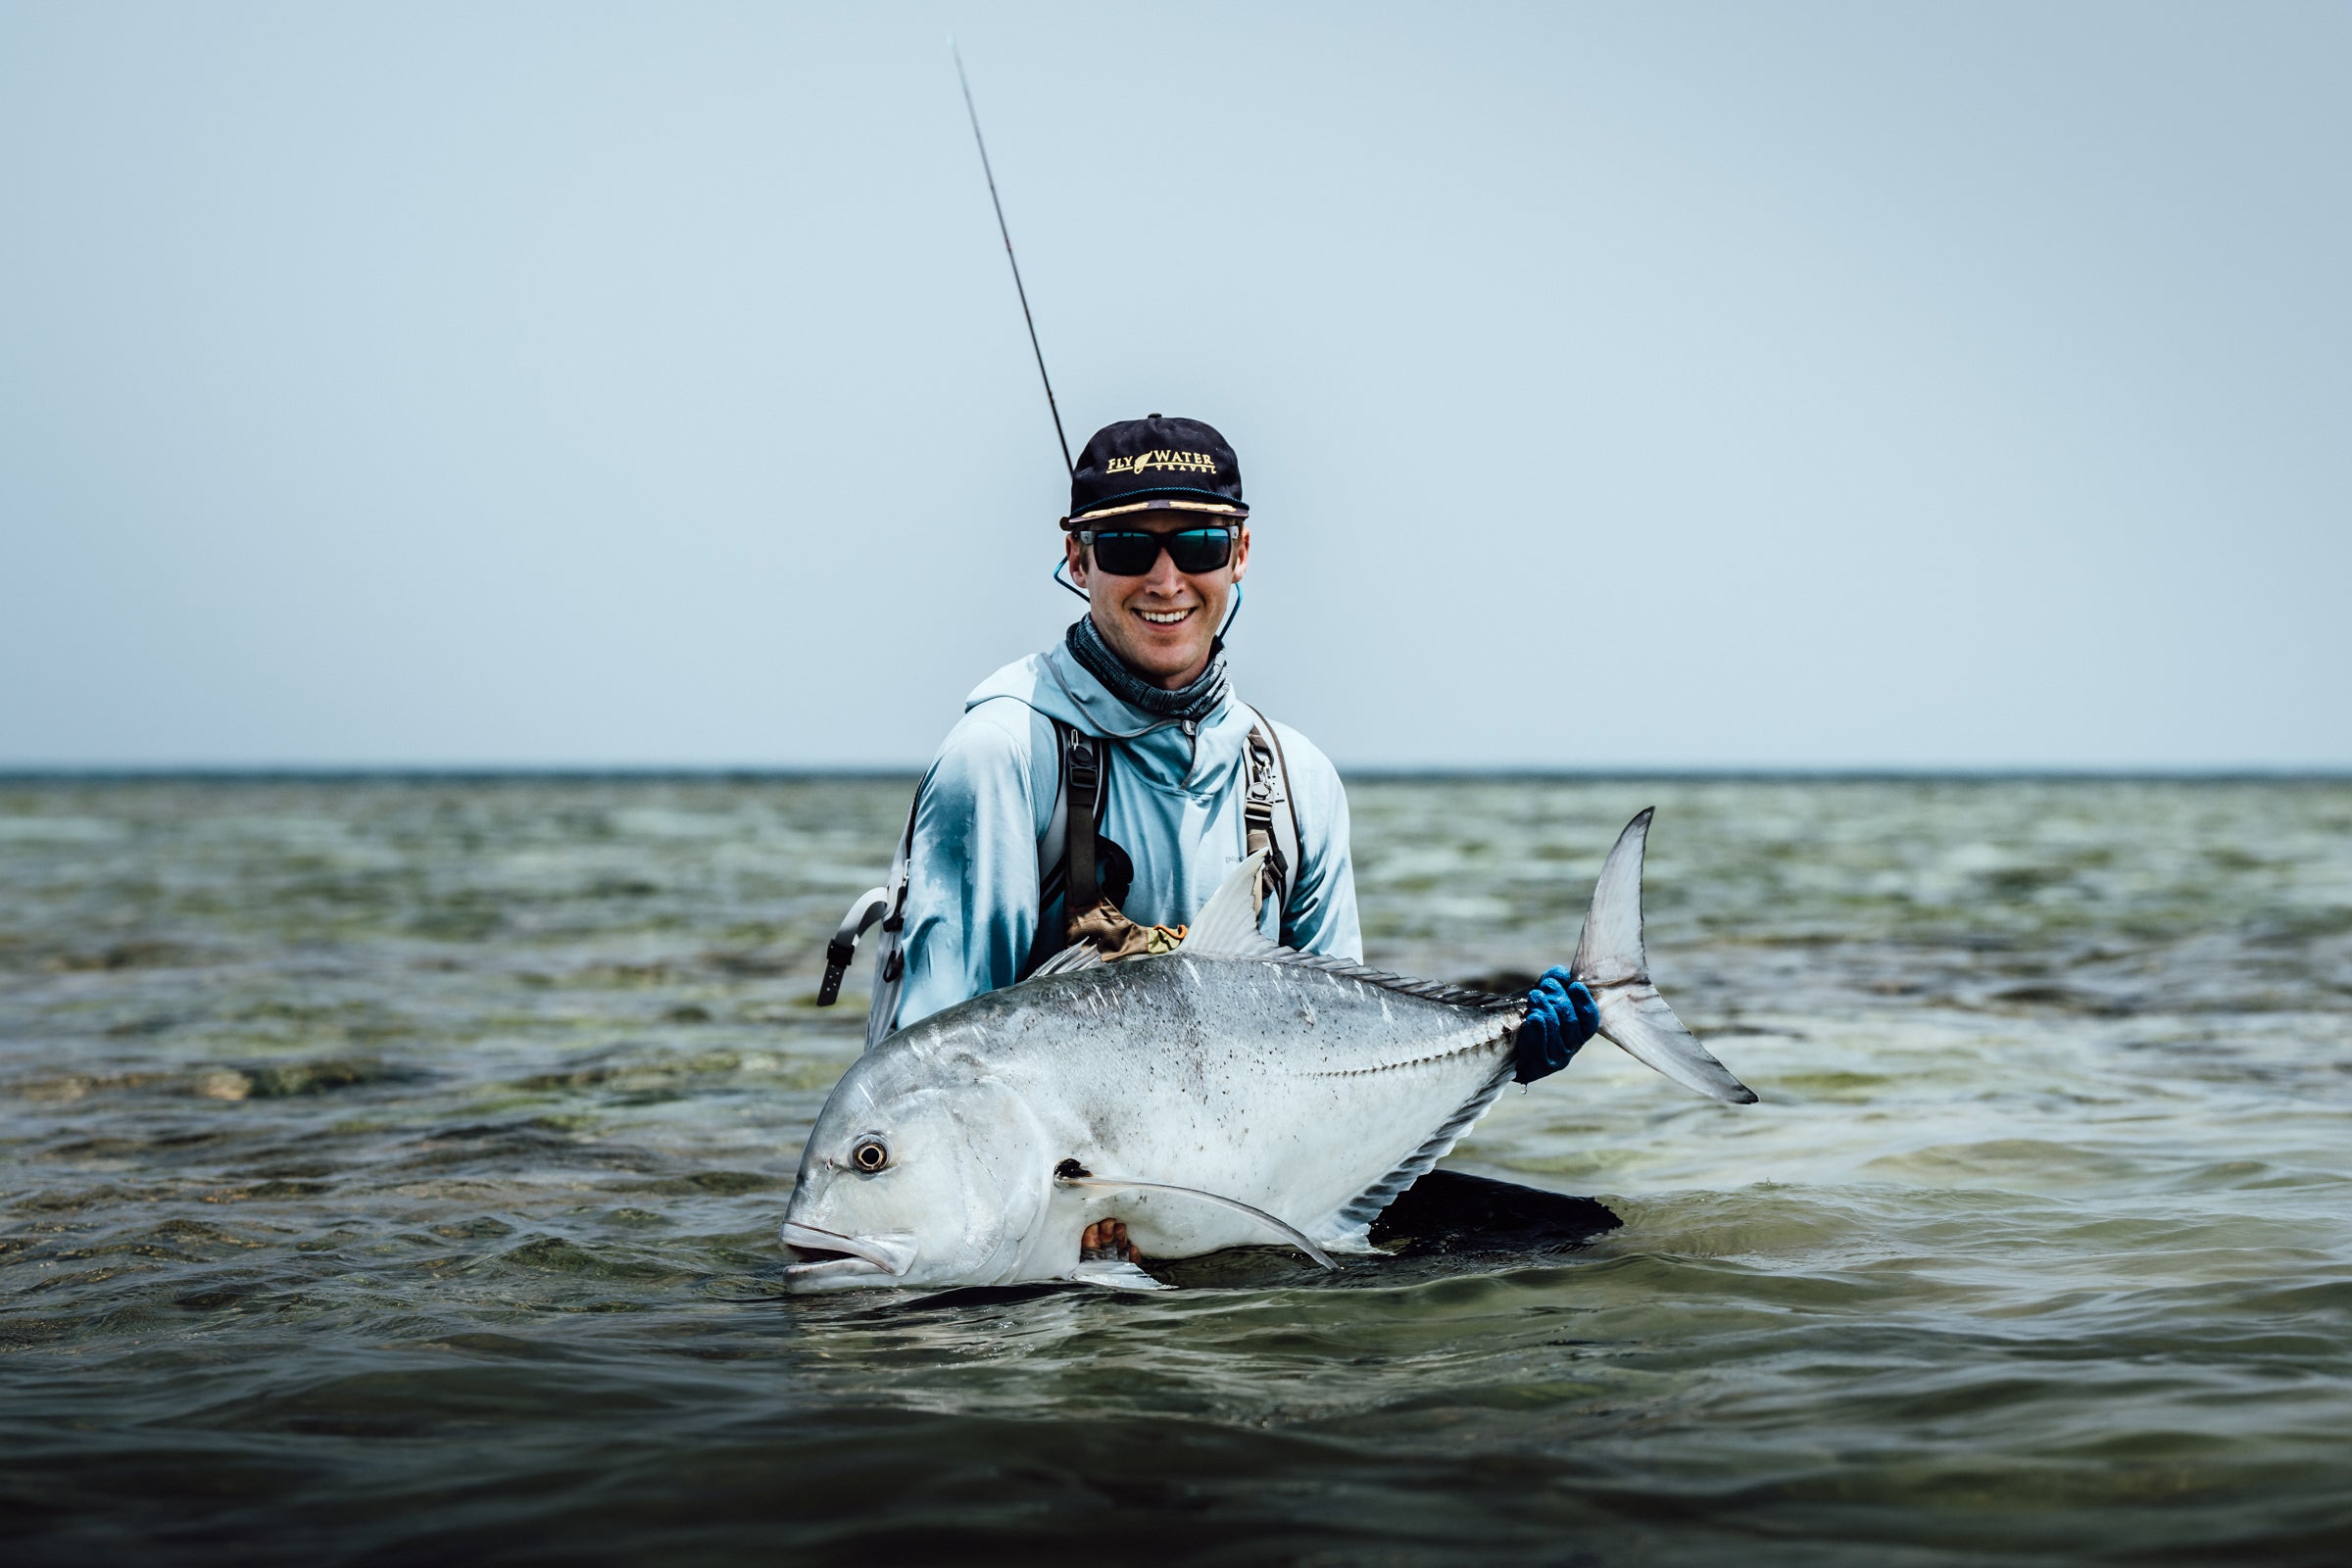 Fly Fishing Bluefin Trevally - The Catch, Facts, Flies, Rods & More